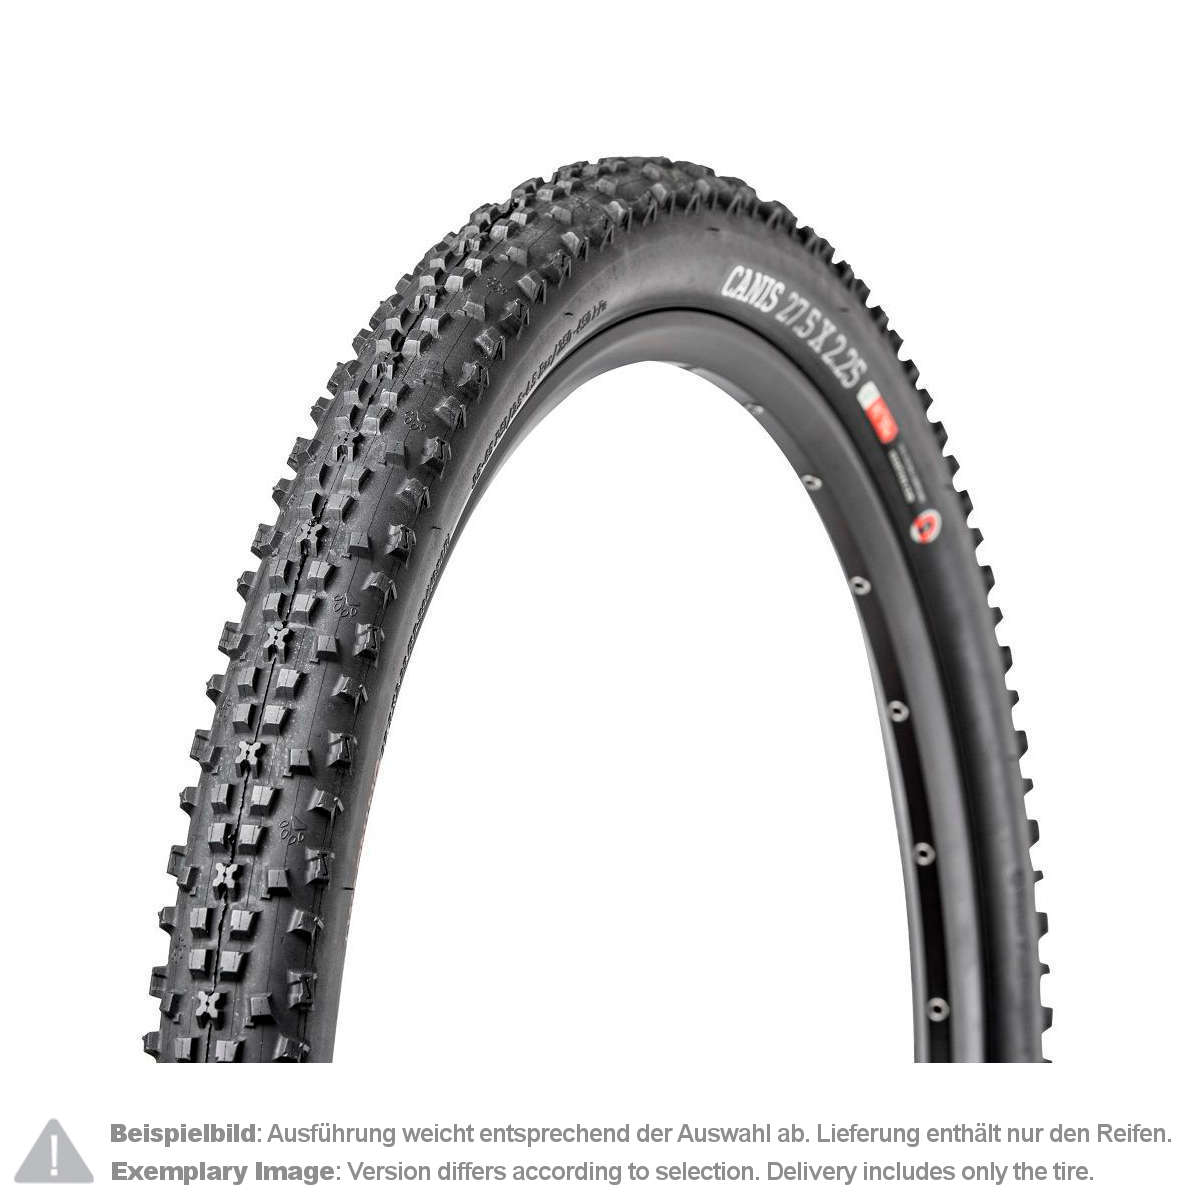 Onza MTB Tire Canis Black, 29 x 2.25 Inch, Tubeless Ready, 120 TPI, FRC, 65a/55a, Foldable